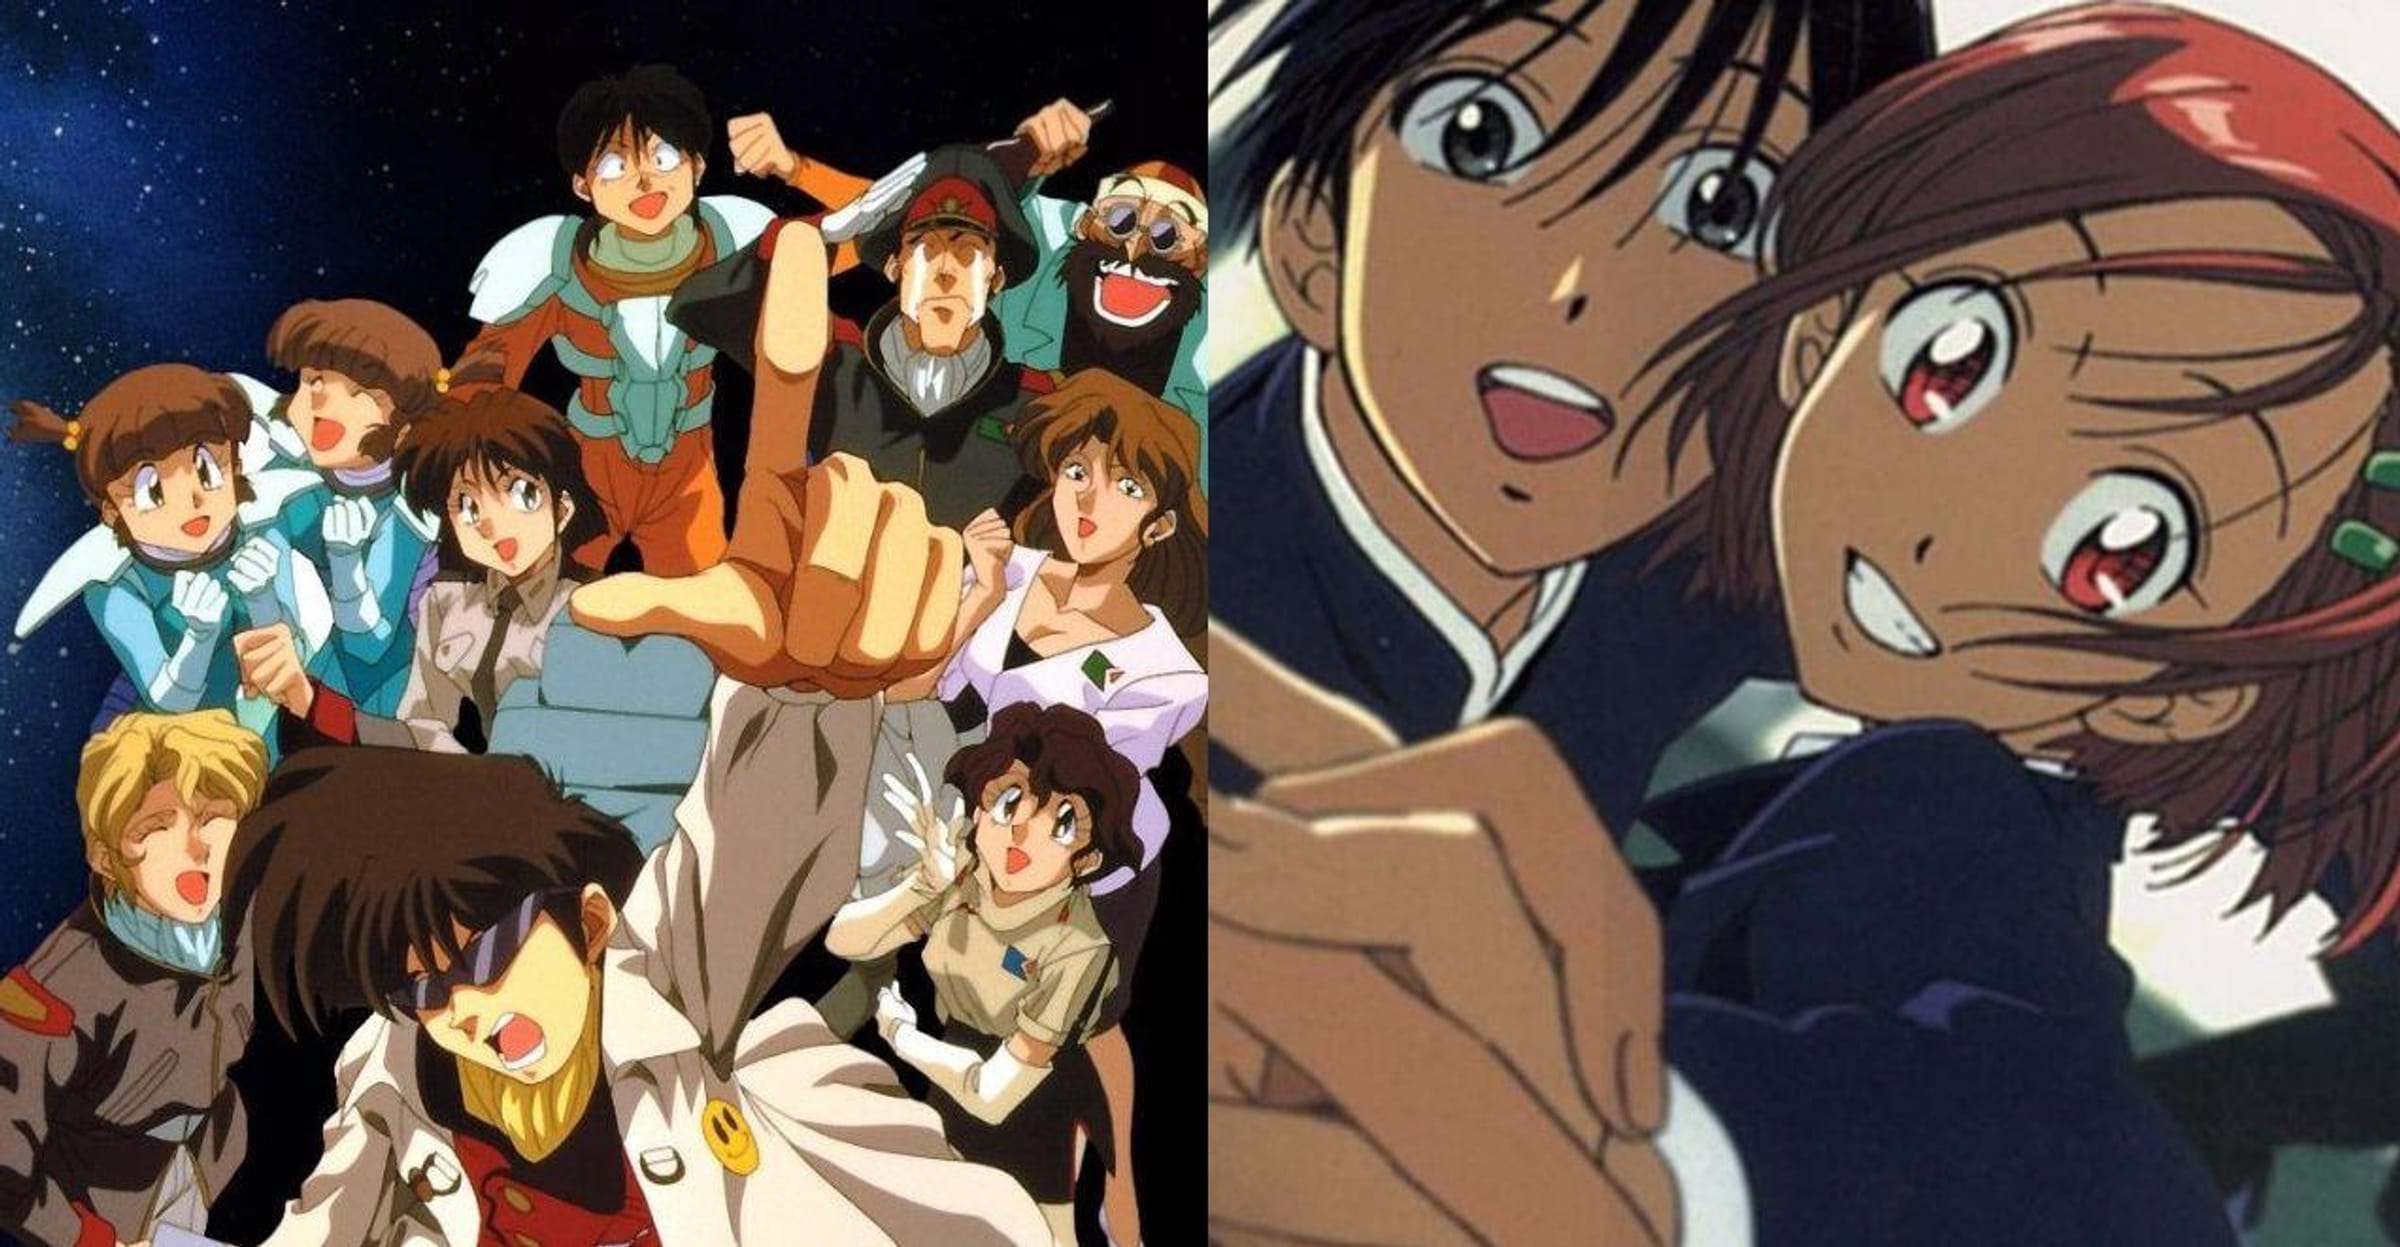 What are some lesser known anime that are actually great? - Quora